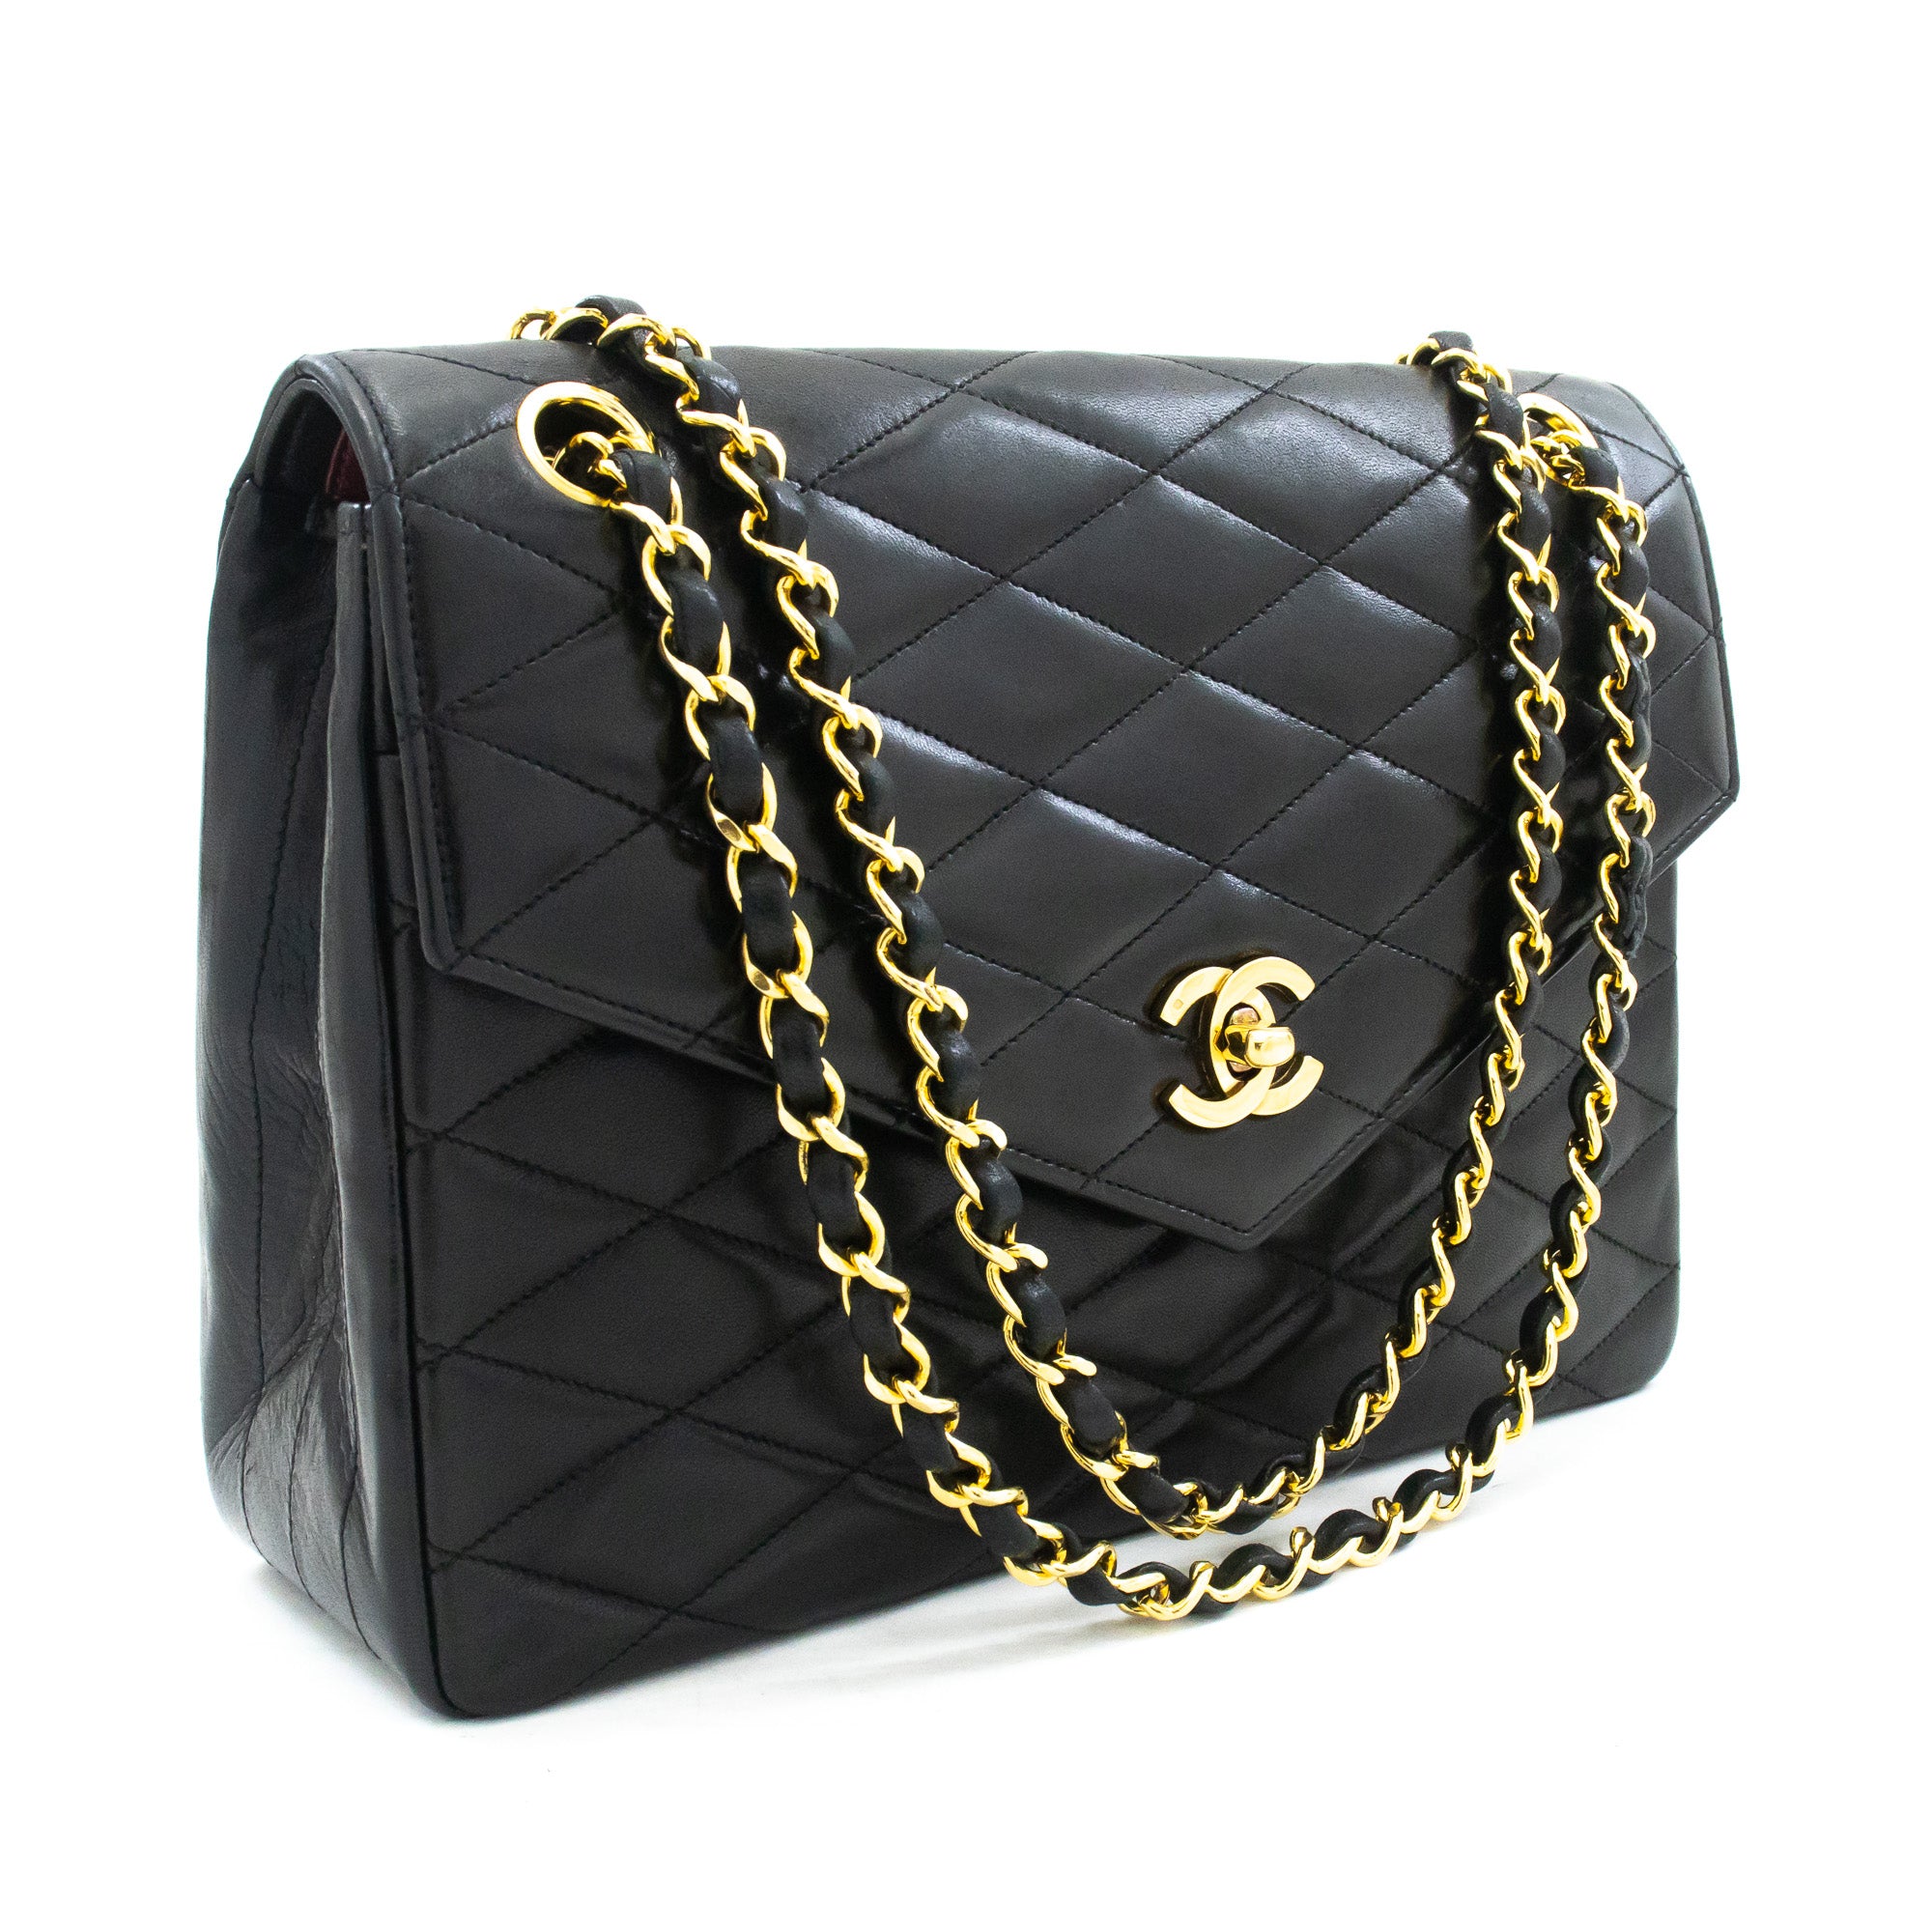 CHANEL White Quilted Lambskin Vintage Mini Classic Single Flap Bag